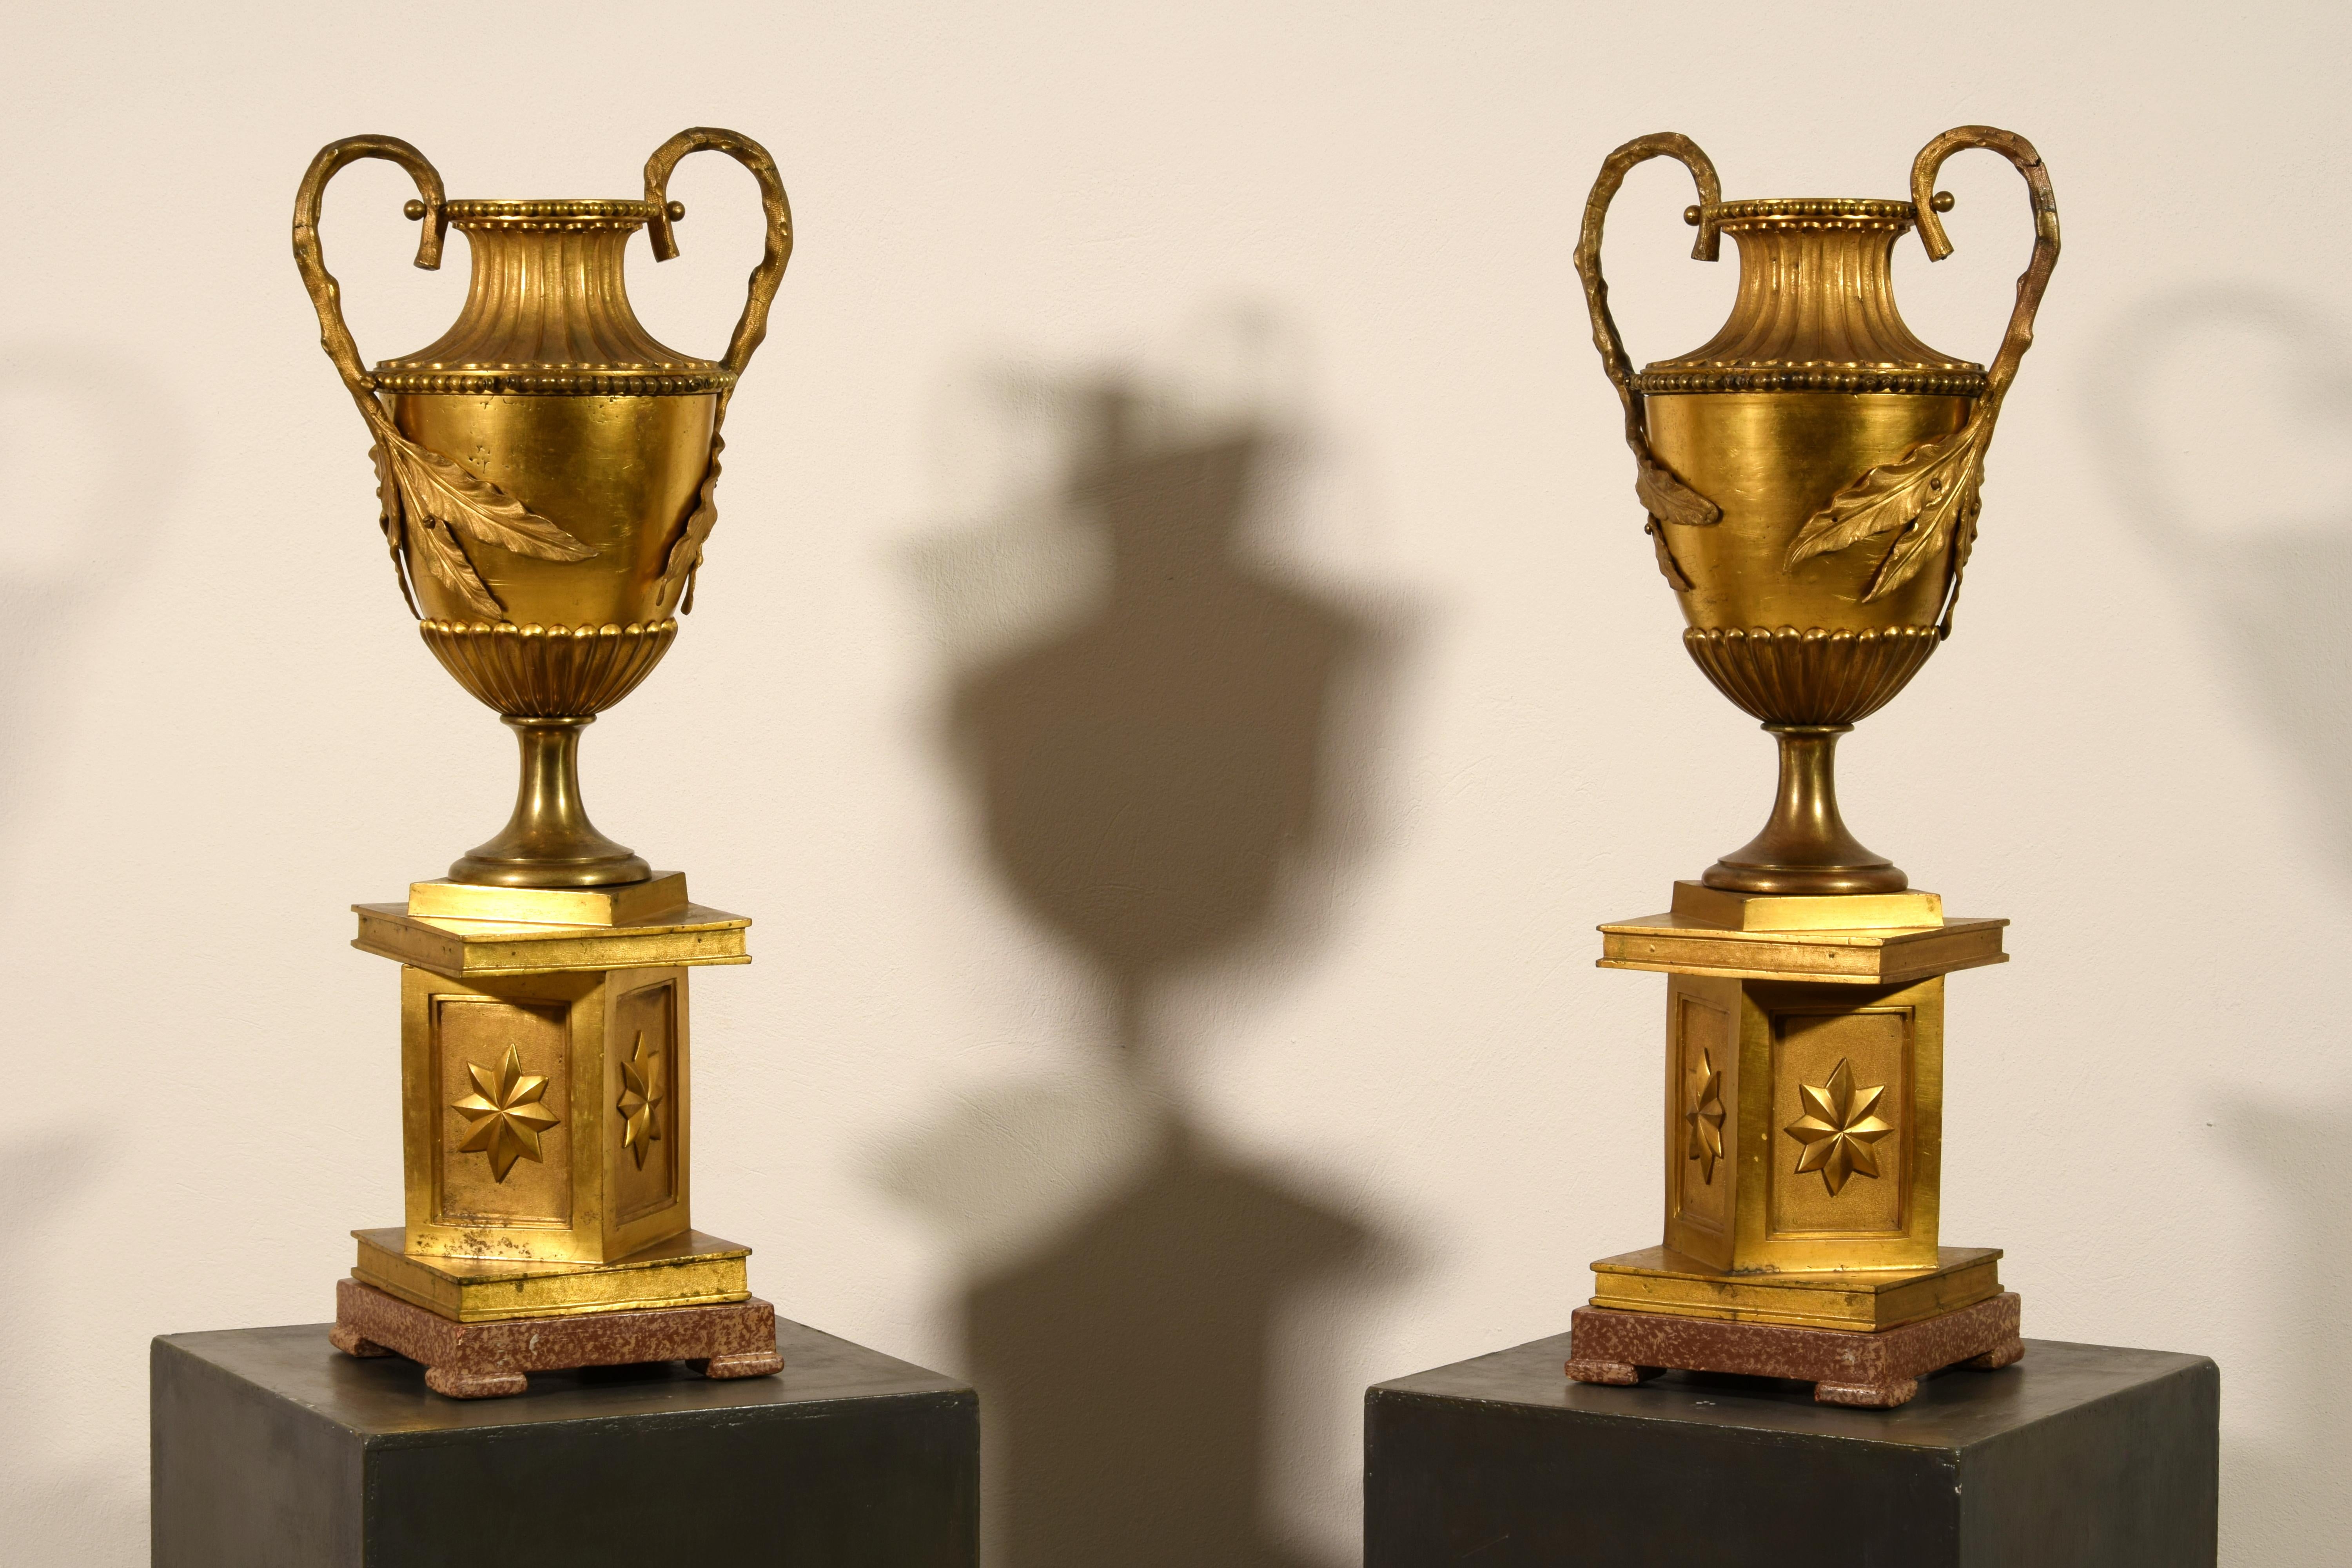 18th century Pair of Large Italian Neoclassical Gilt Bronze Vases 

The pair of neoclassical vases was made in Italy in the end of 18th century in finely chiselled bronze.
Of classical taste, the vases are “baccellati” in the upper and lower part